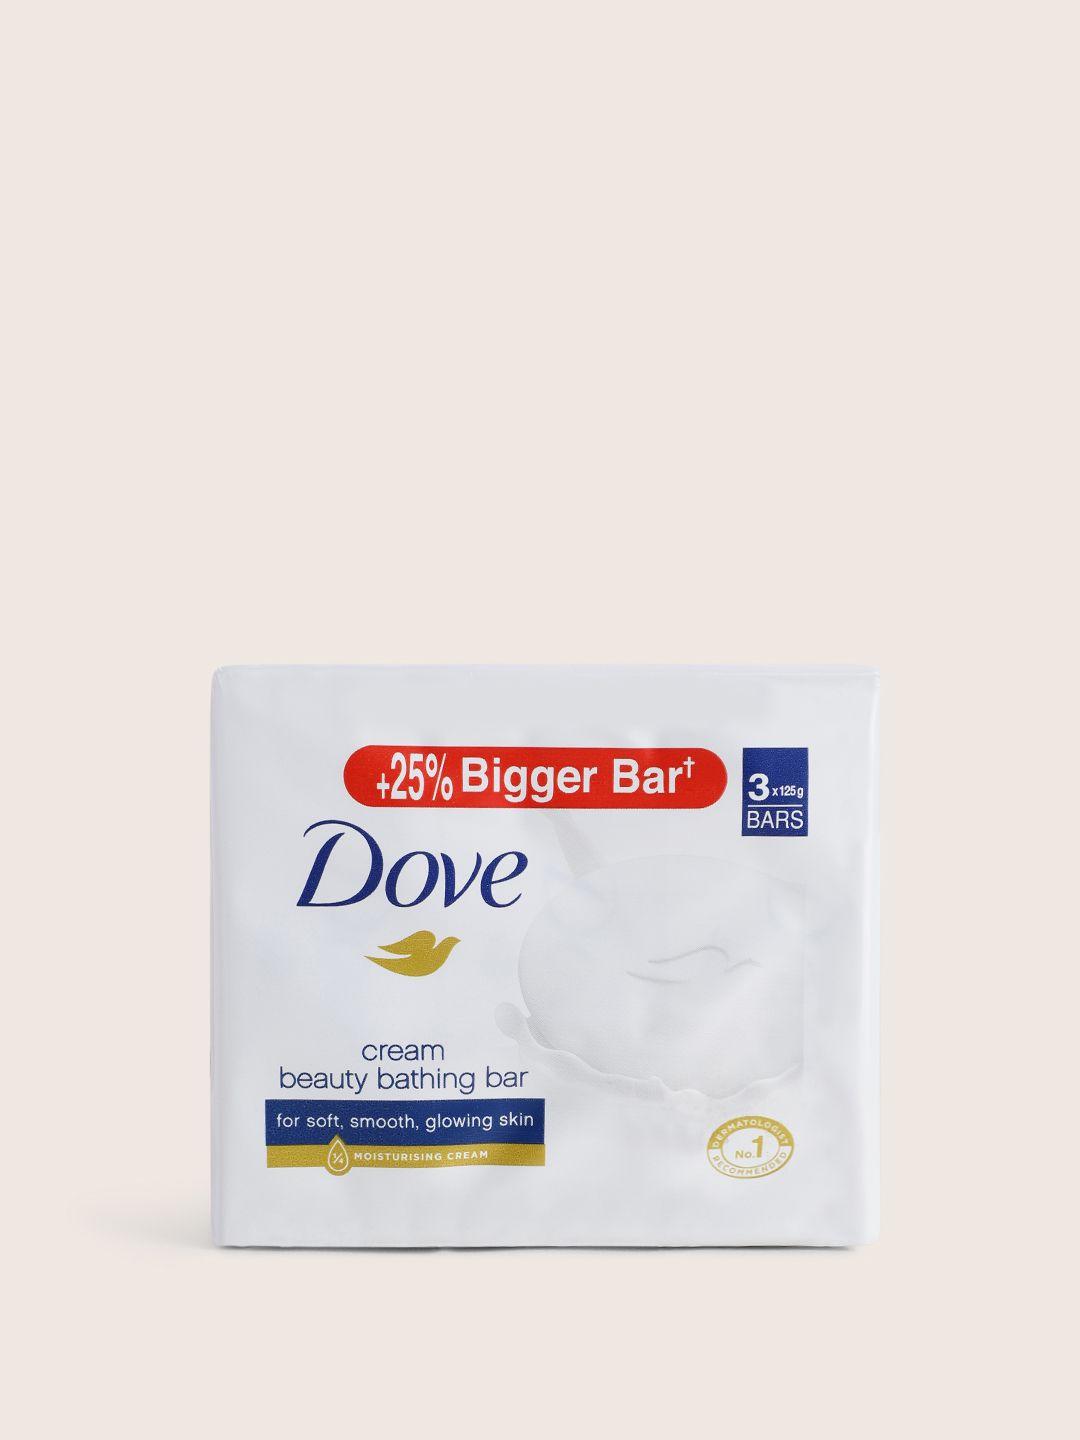 dove set of 3 cream beauty bathing bar for smooth & glowing skin - 125 g each